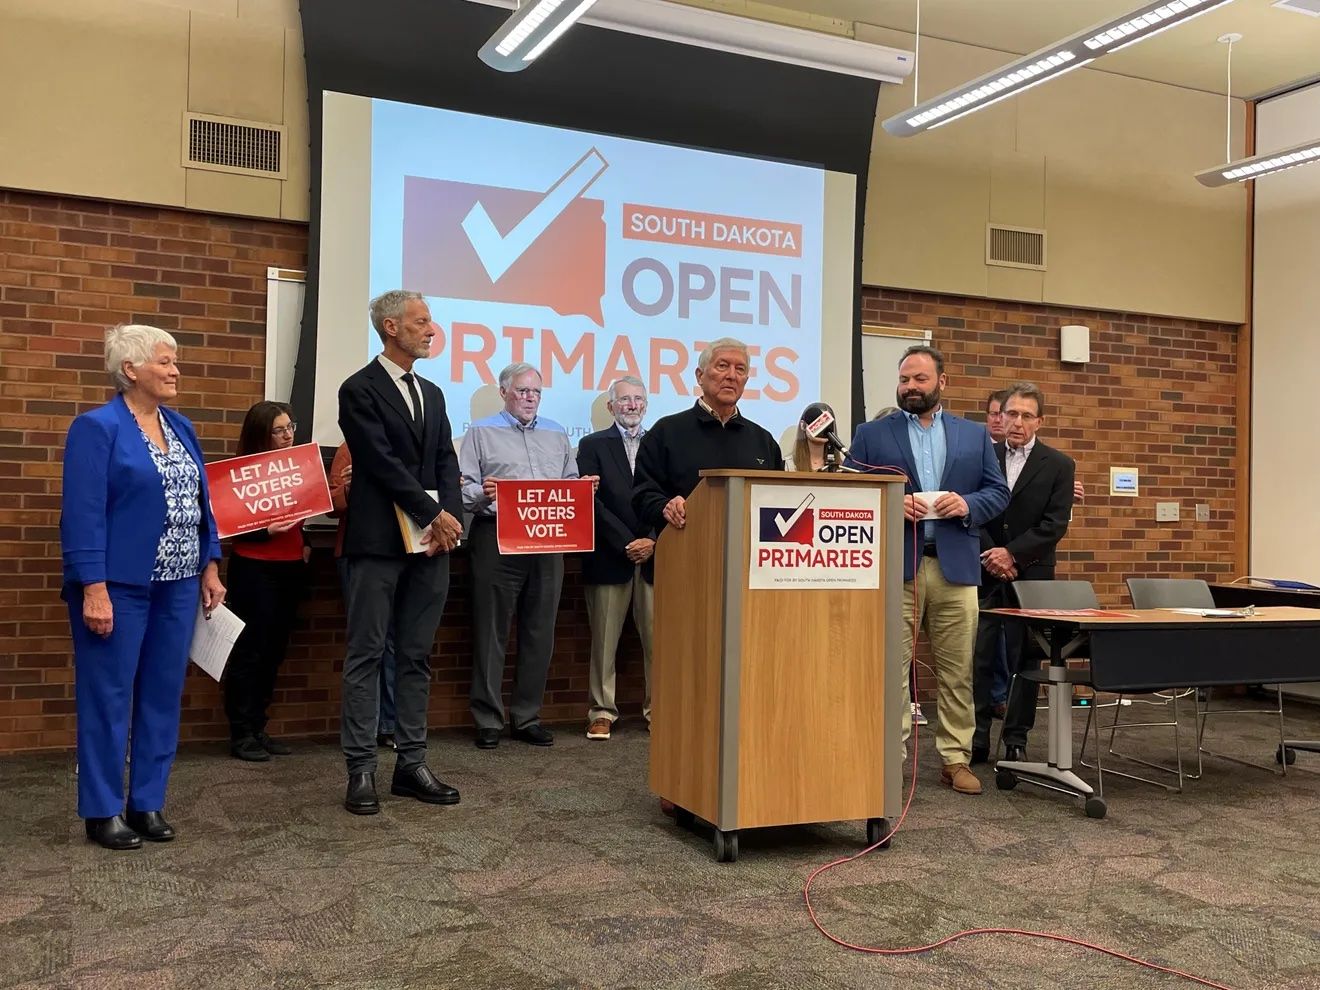 Members of the South Dakota Open Primaries groups stand behind a podium during a news conference